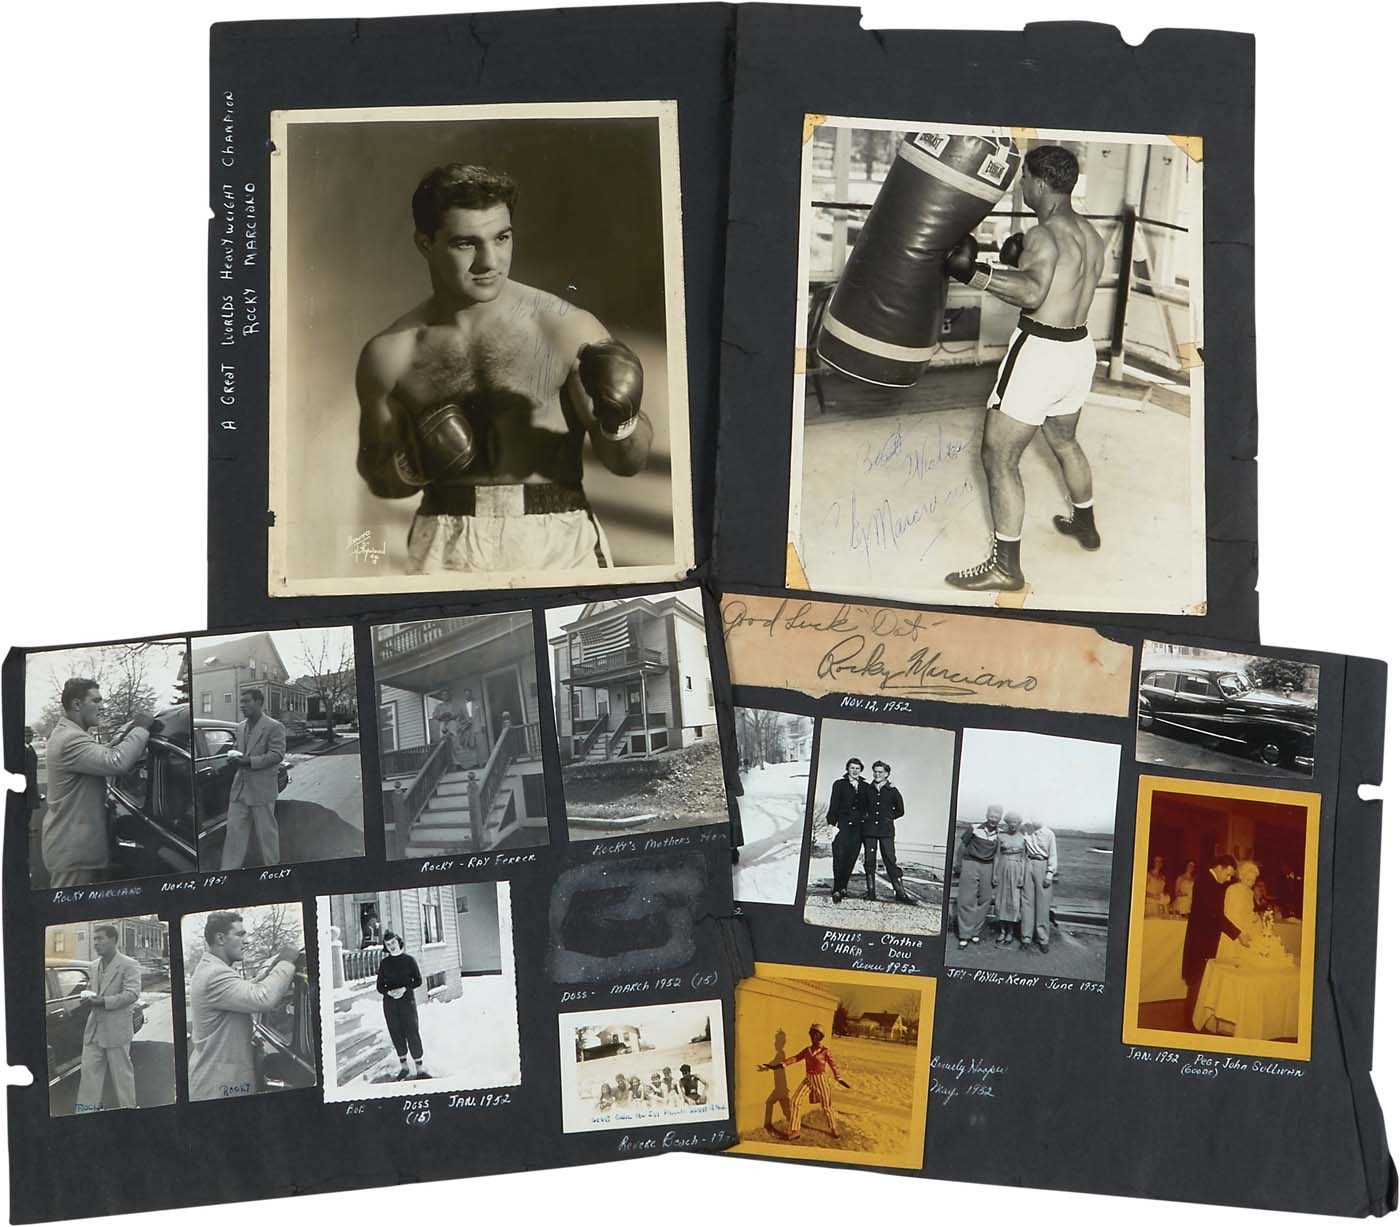 Muhammad Ali & Boxing - 1950s Rocky Marciano Collection w/Autographs & Glove (15+) (PSA)